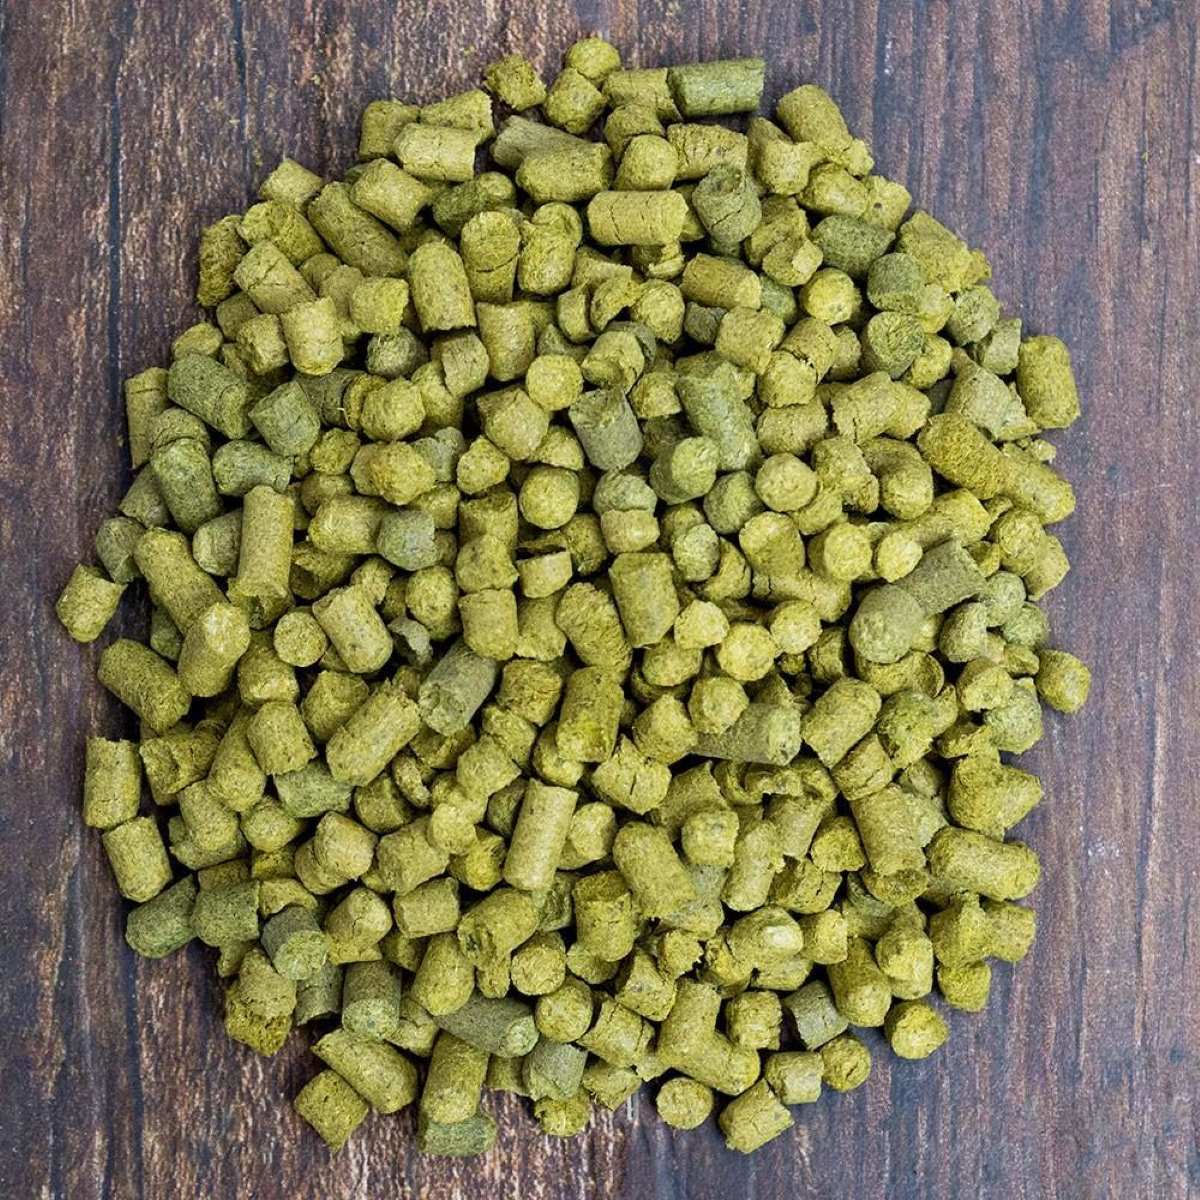 How To Store Hop Pellets